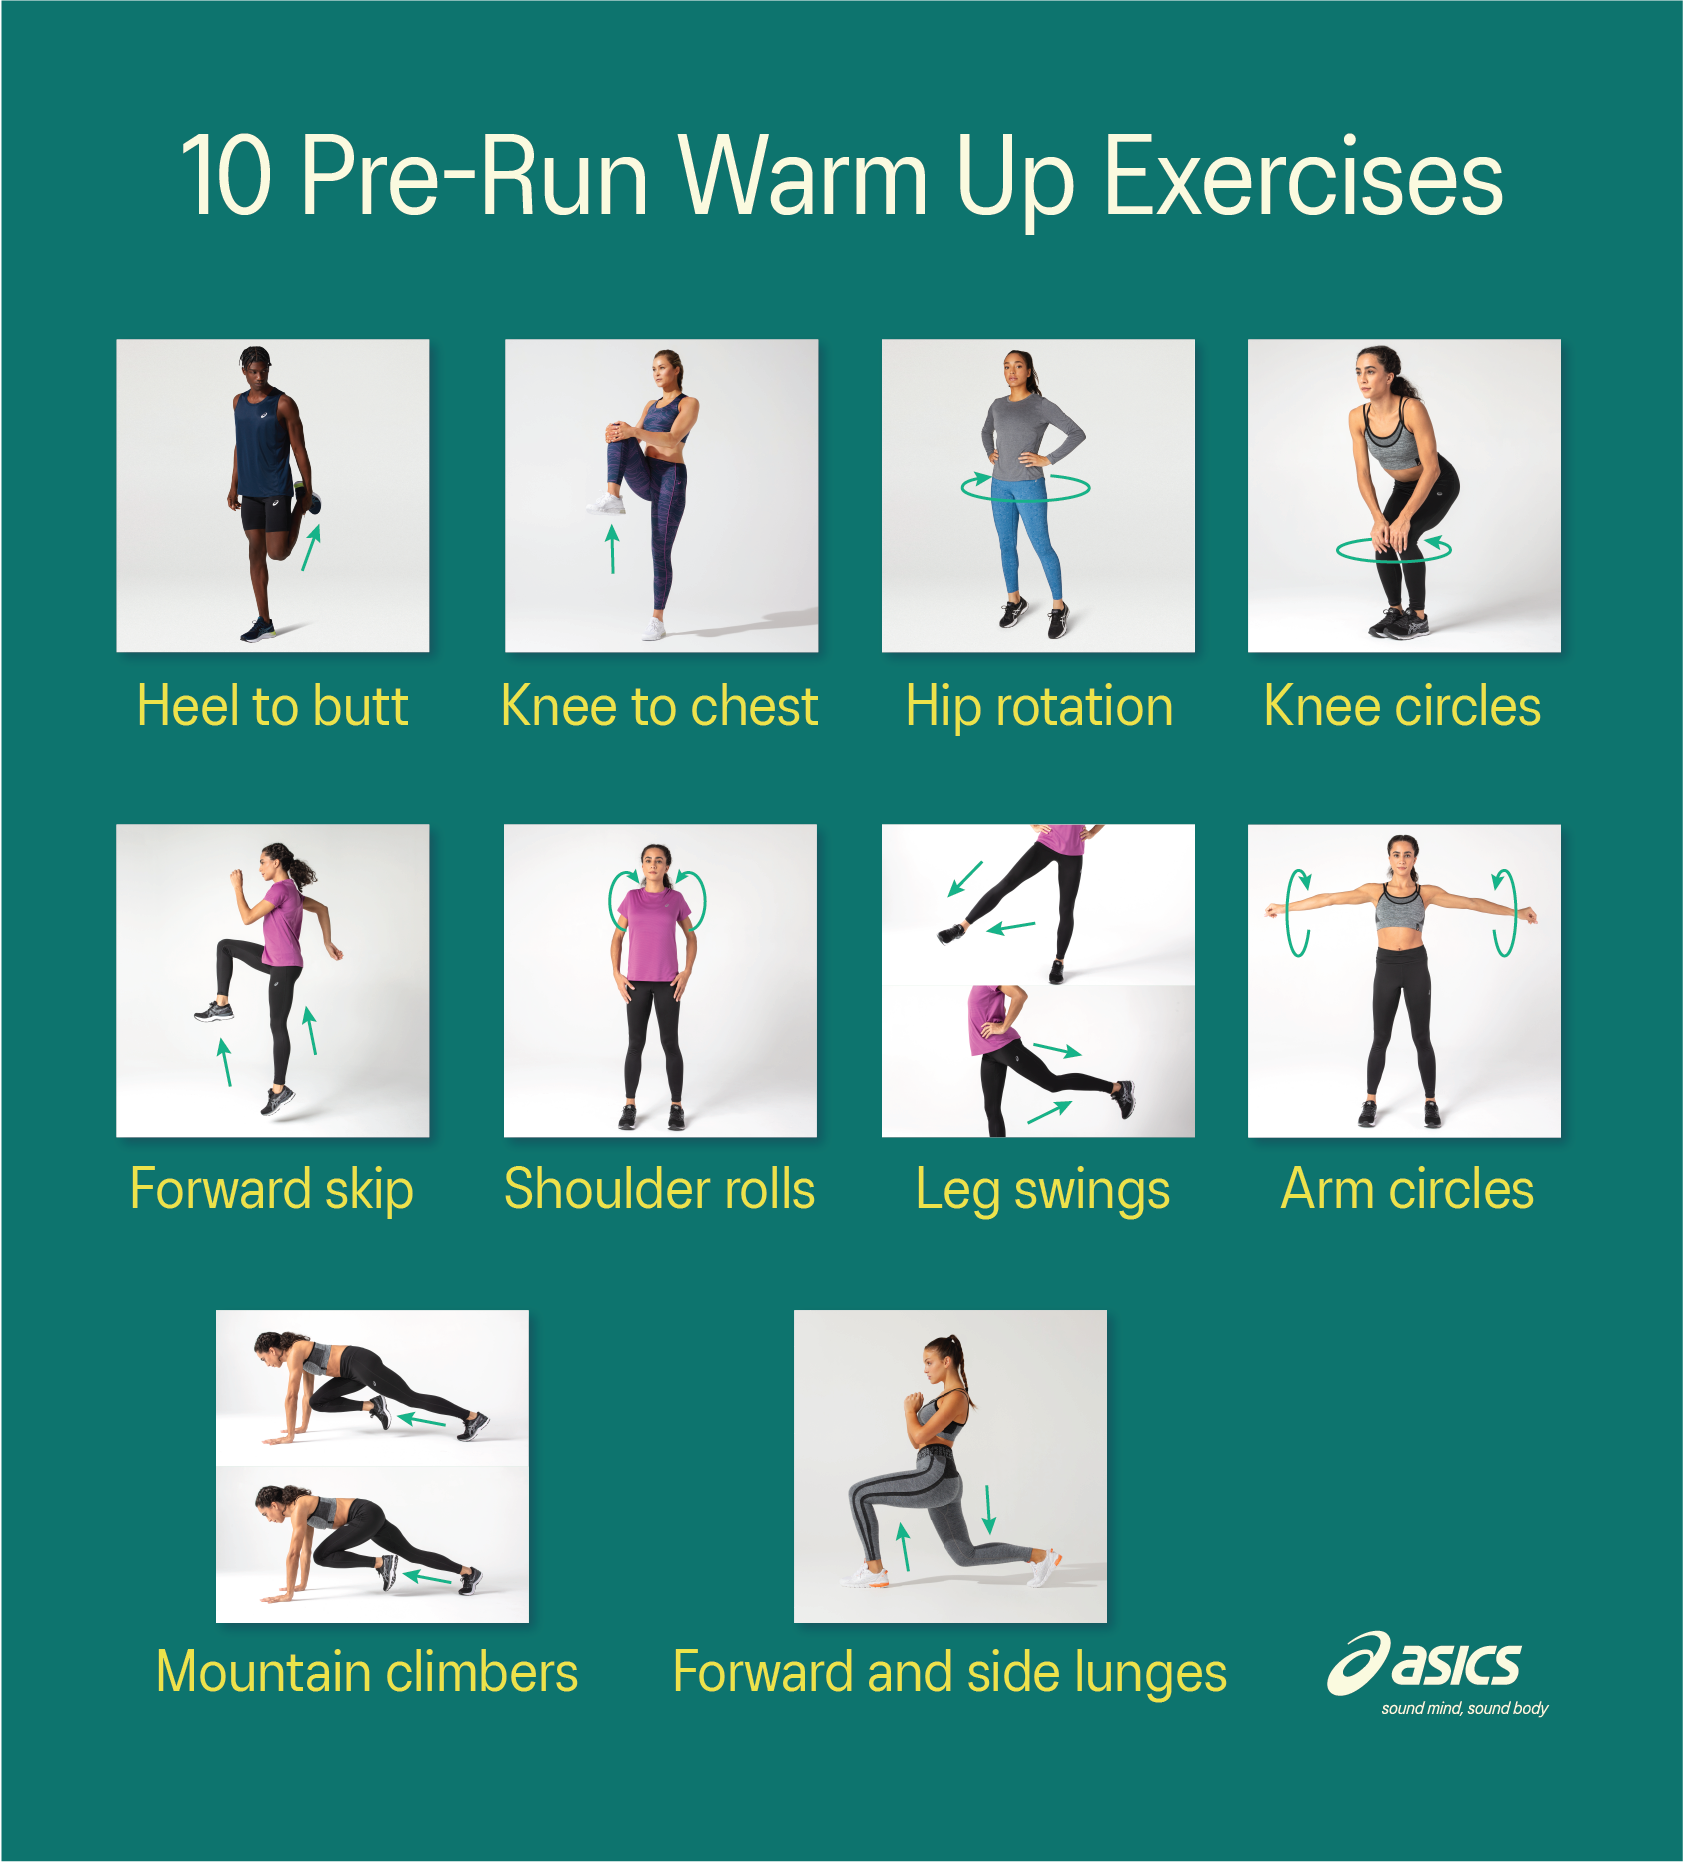 10 Pre-Run Techniques for Warming Up